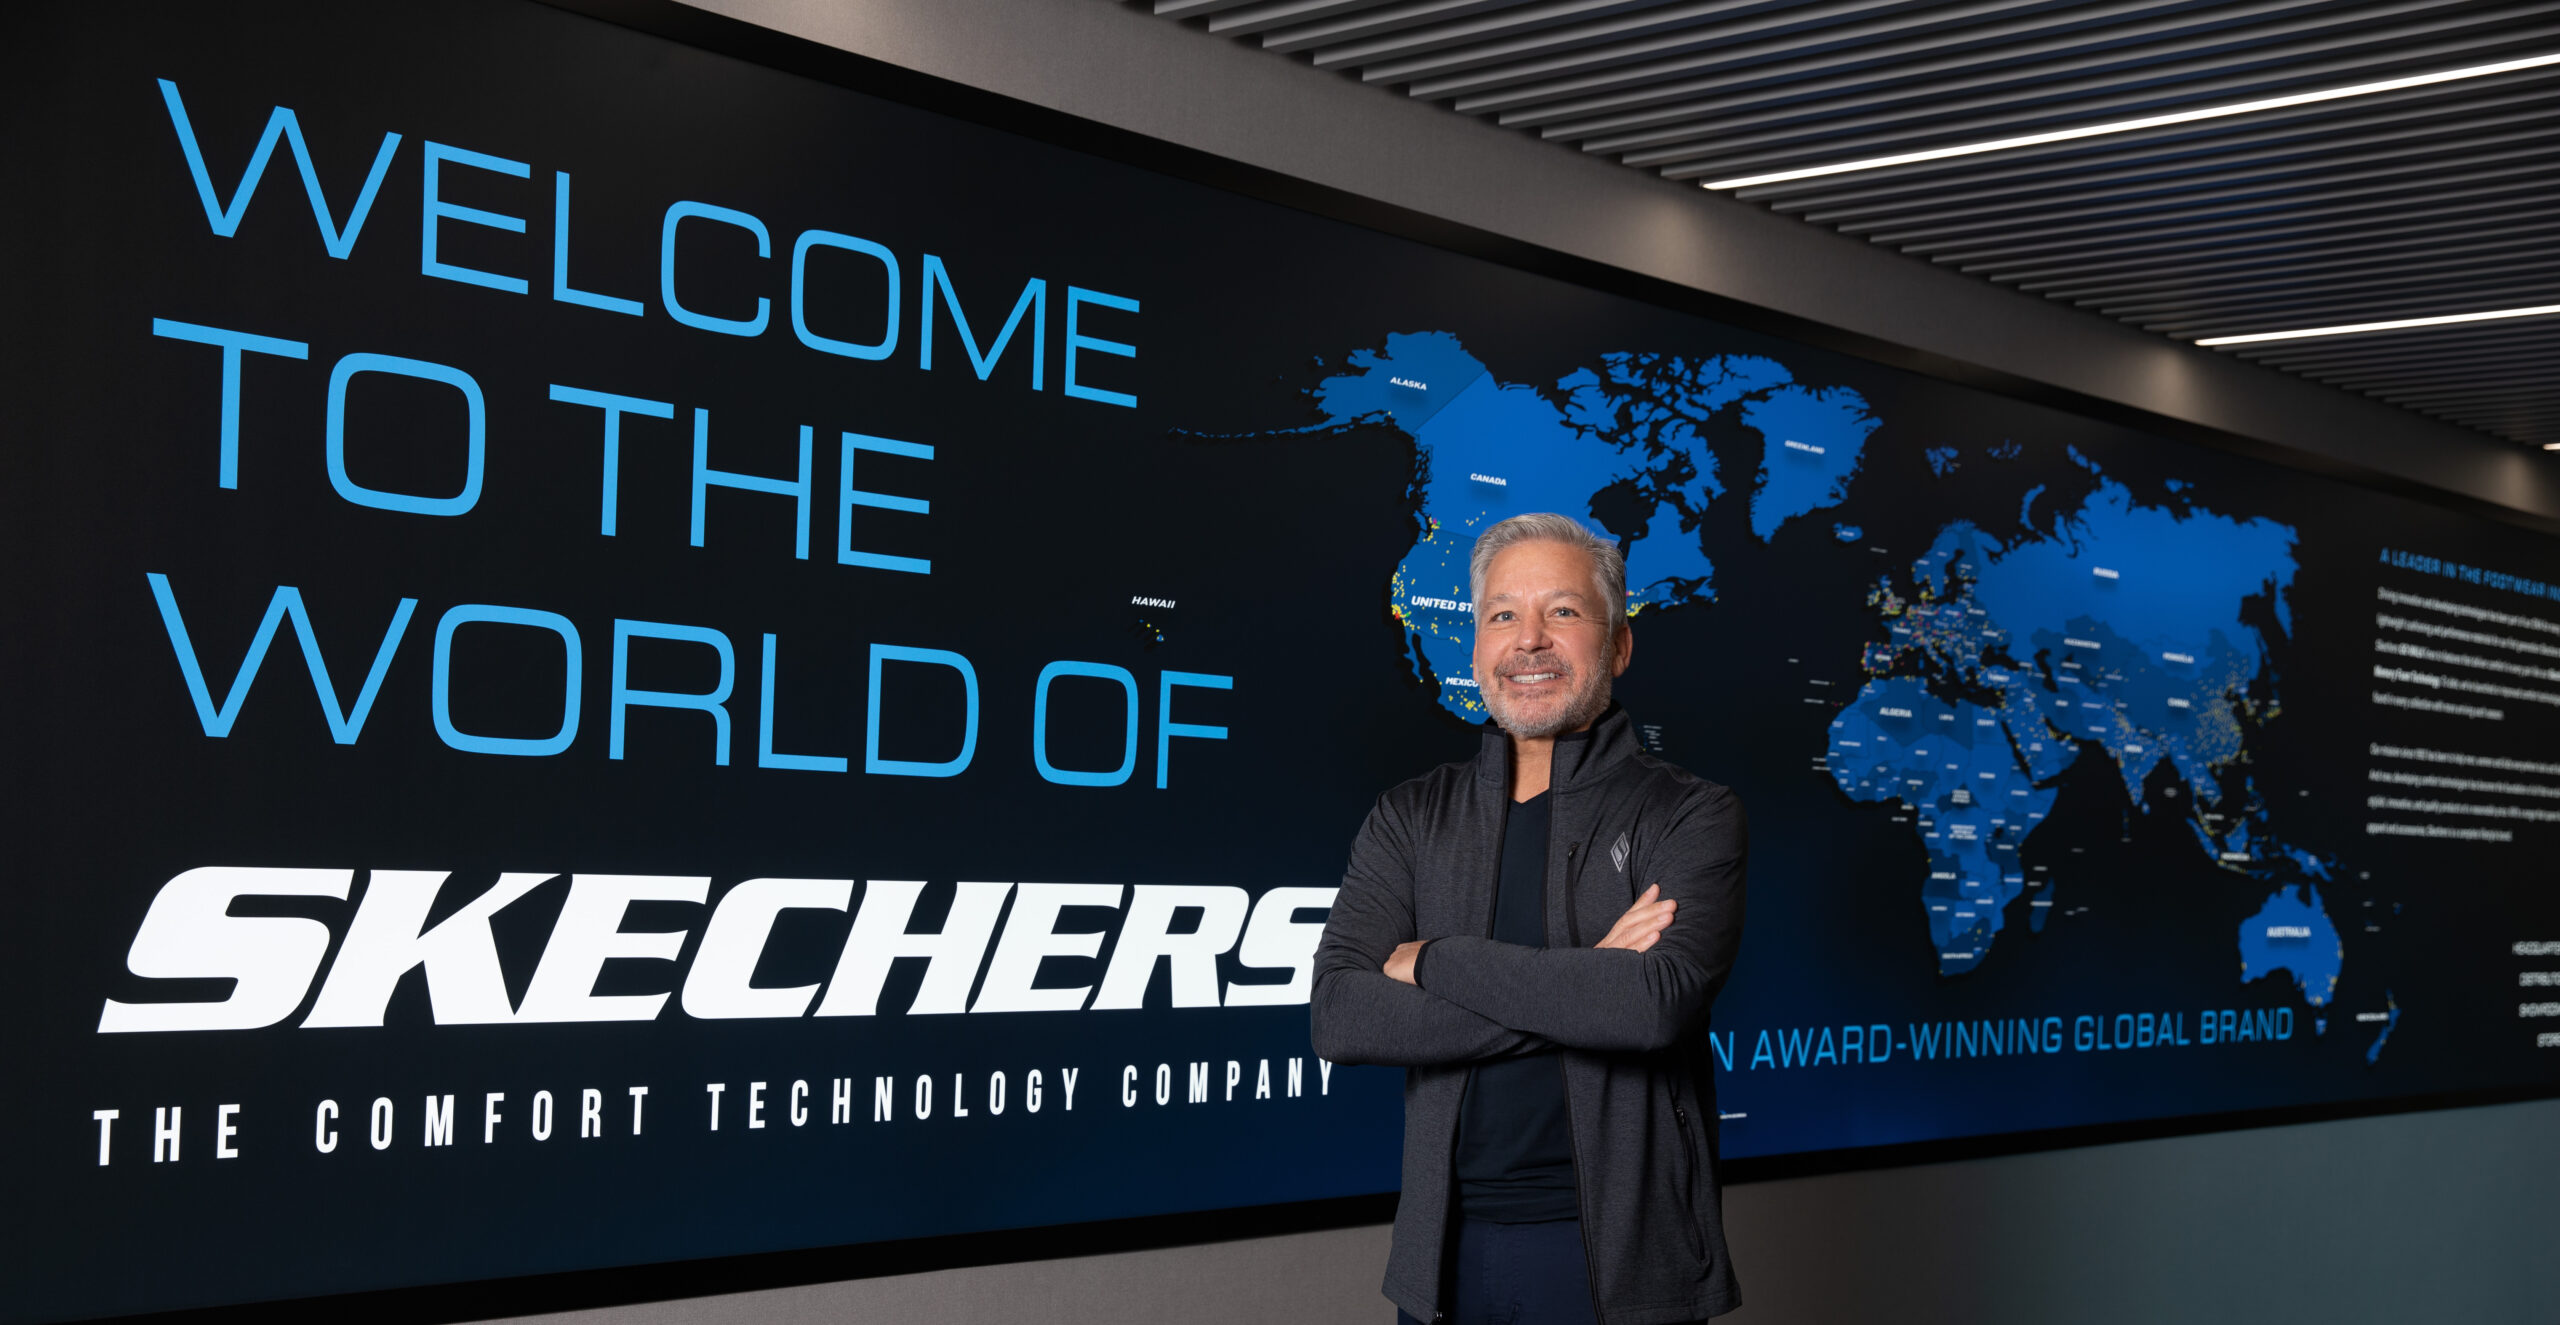 About Us Skechers (about.skechers.com)